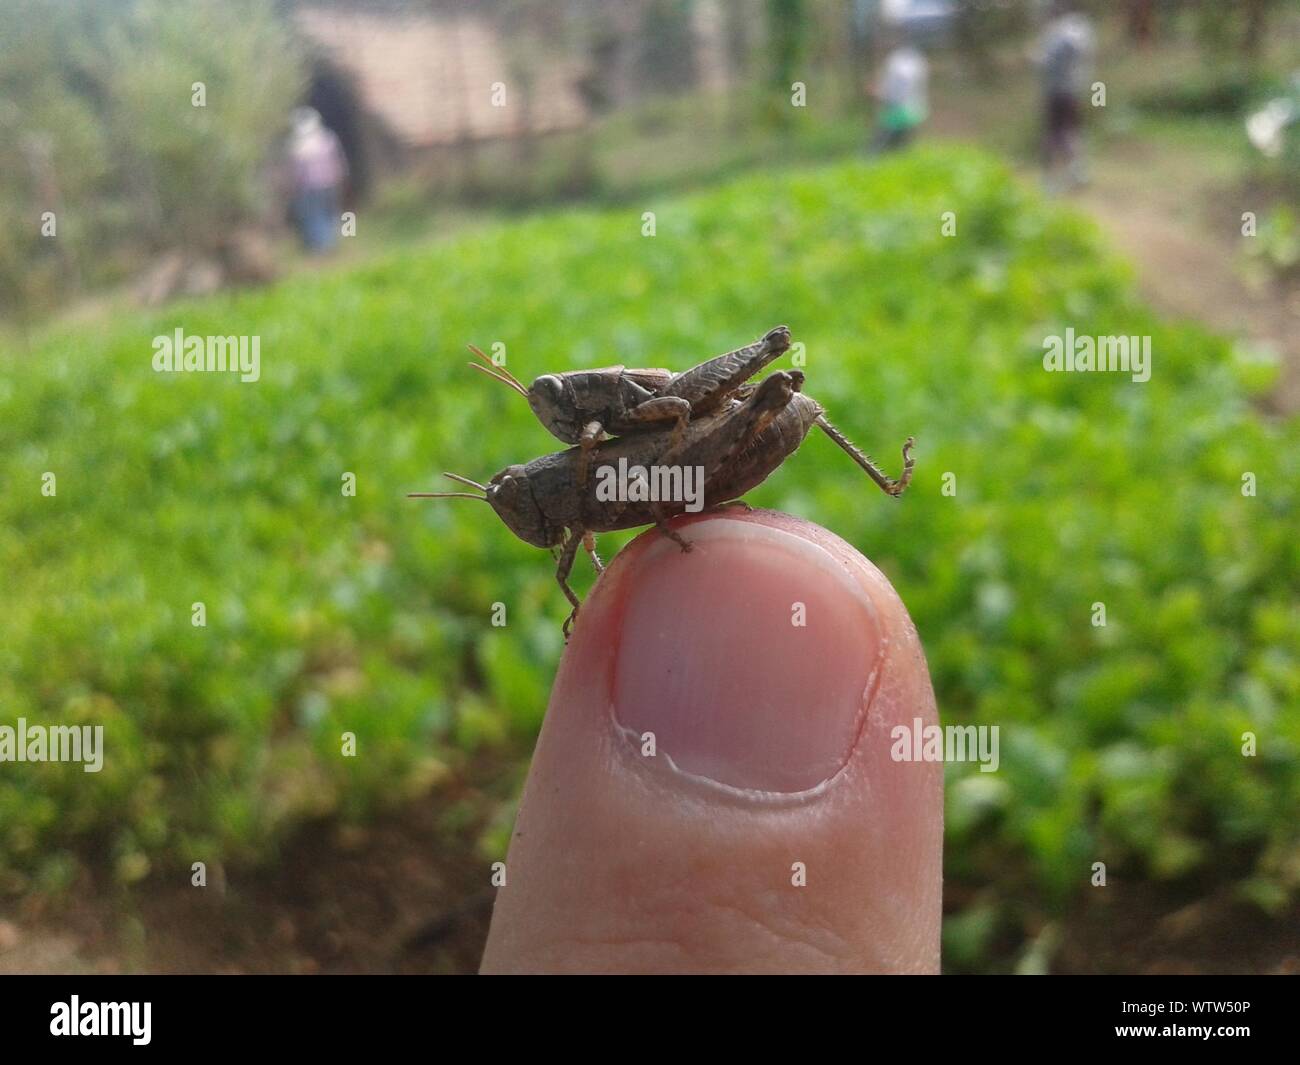 Close-up Of Crickets Mating On Finger Stock Photo